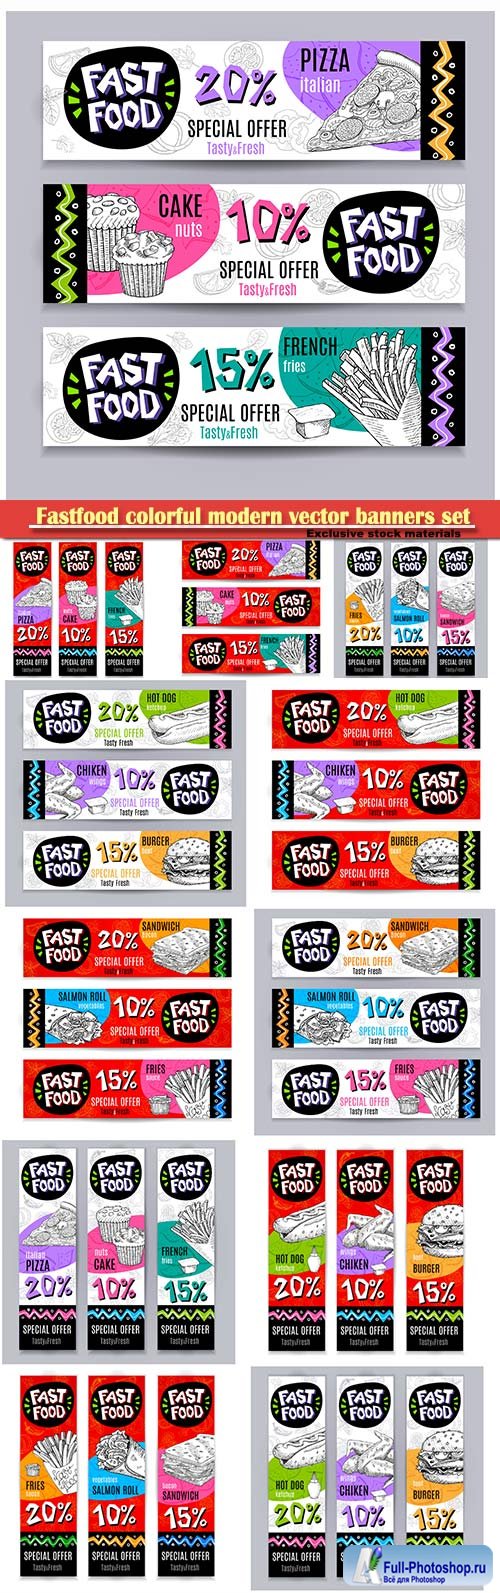 Fast Food colorful modern vector banners set # 2